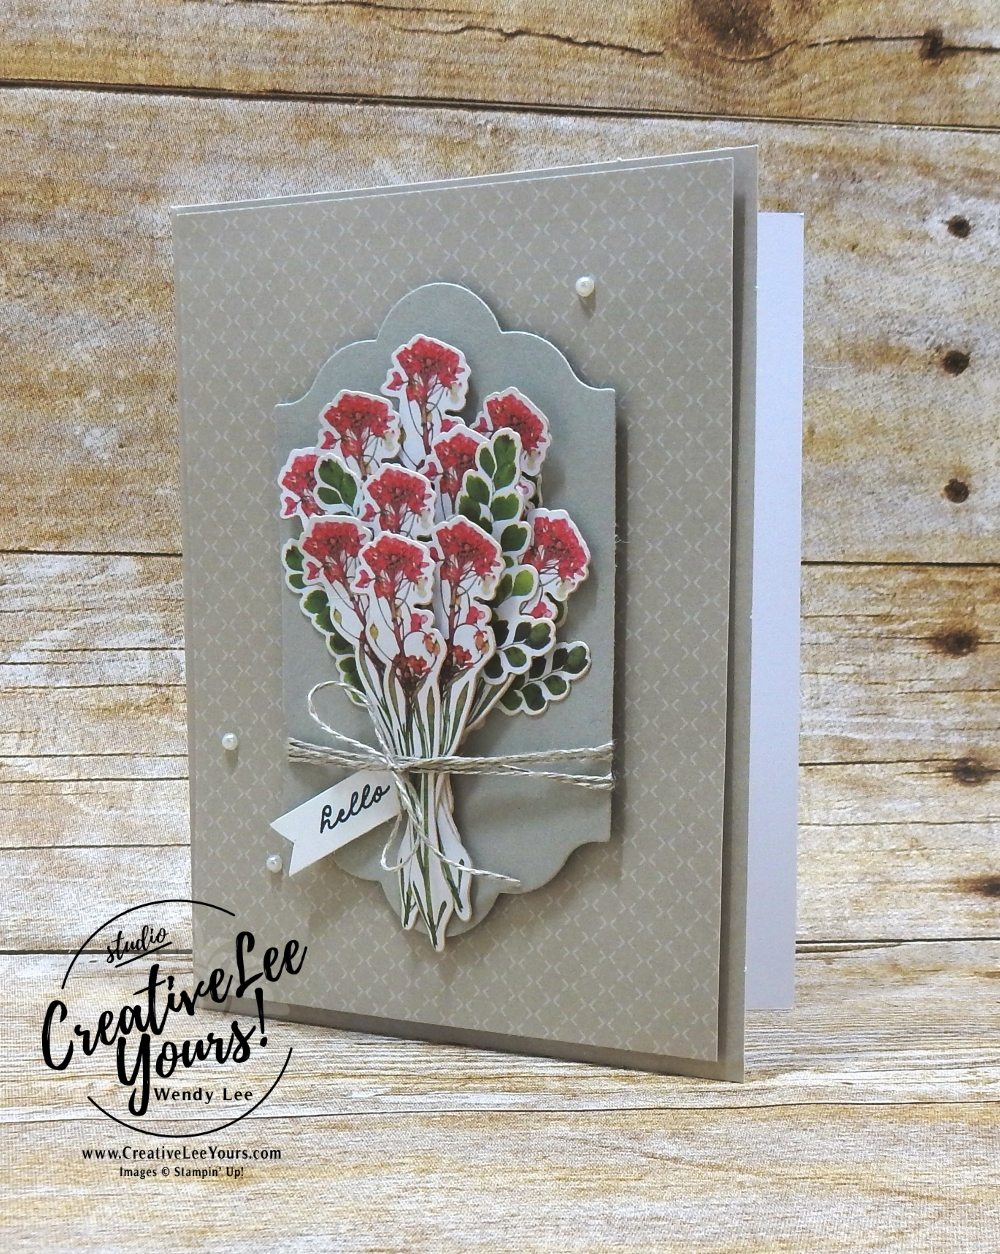 February 2018 wildflower wishes Paper Pumpkin Kit by wendy lee, stampin up, handmade cards, rubber stamps, stamping, kit, subscription, floral,spring cards, thank you, congrats, friend, #creativeleeyours,creatively yours,creative-lee yours,SU, SU cards,alternate